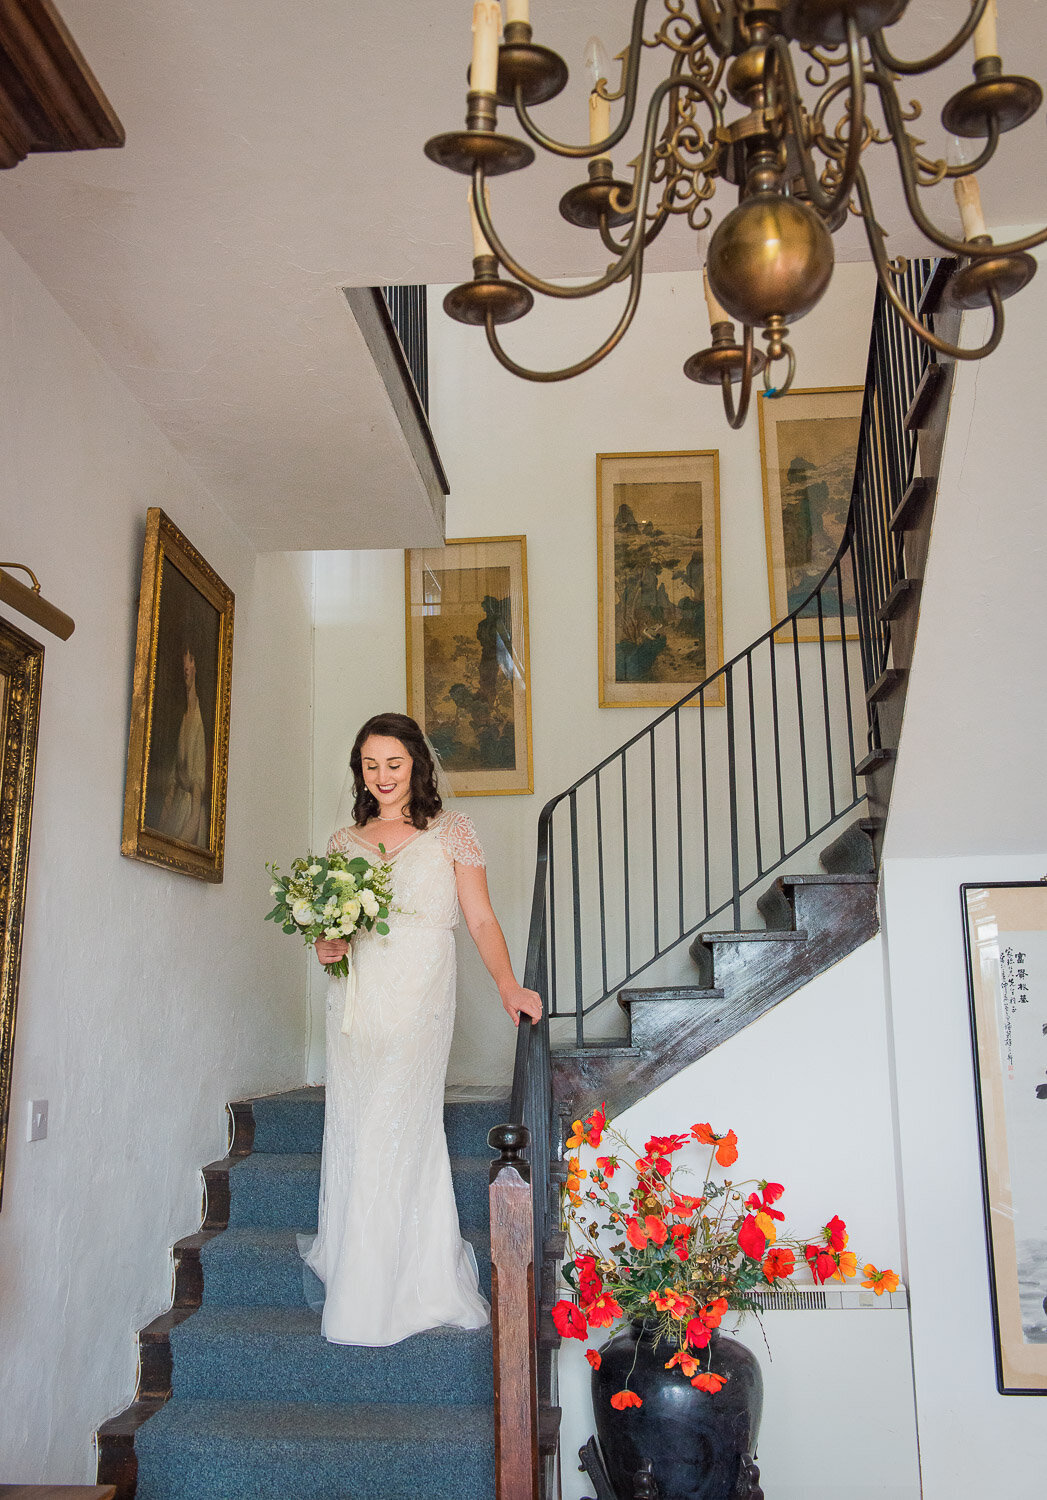 bride wearing a vintage, beaded wedding dress with sleeves walking down the stairs with blue carpet while holding a white flower bouquet